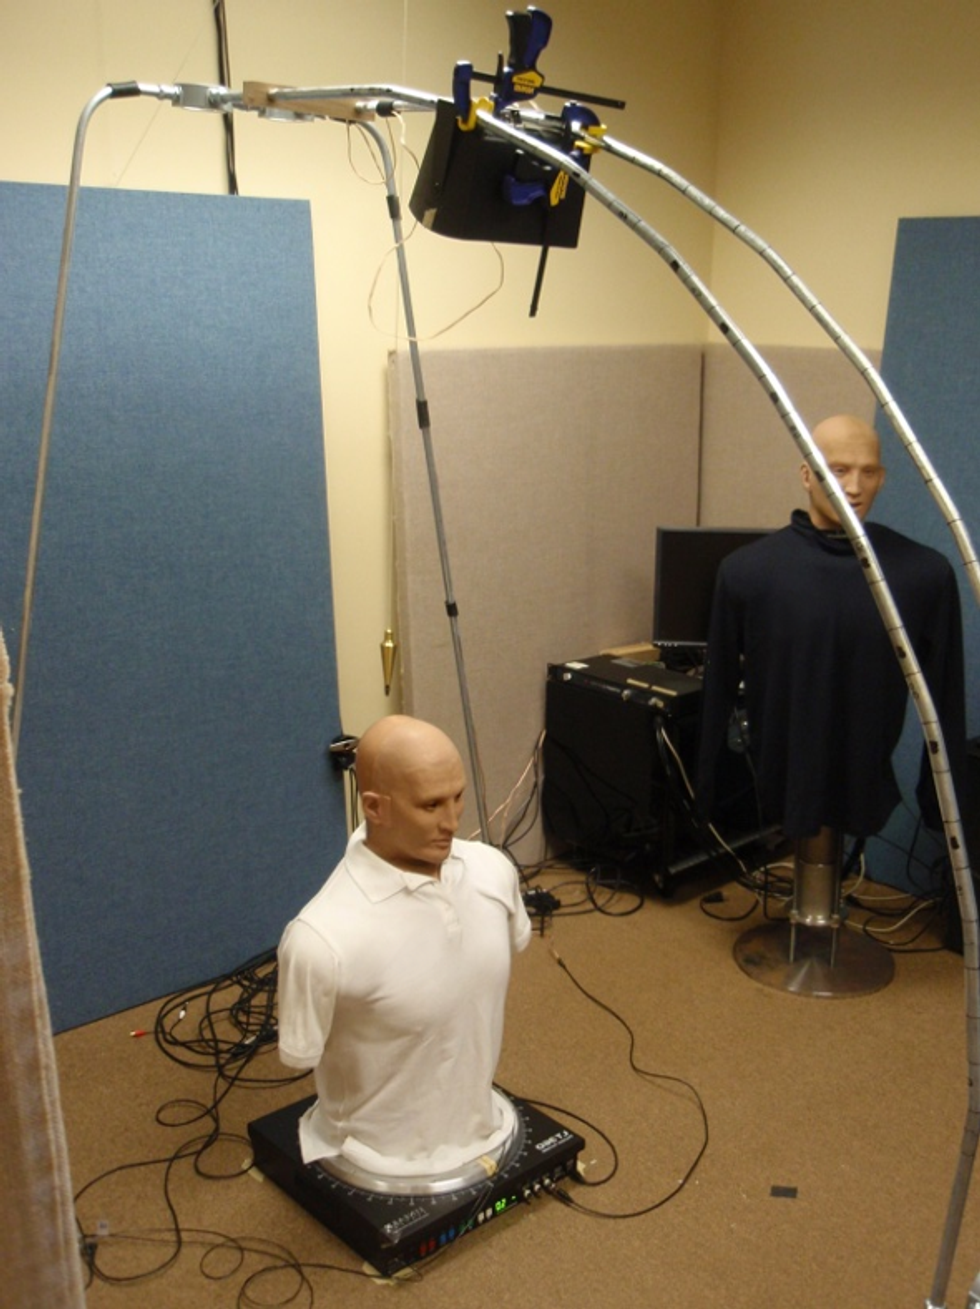 Image of a human body dummy on the floor atop a audio device.